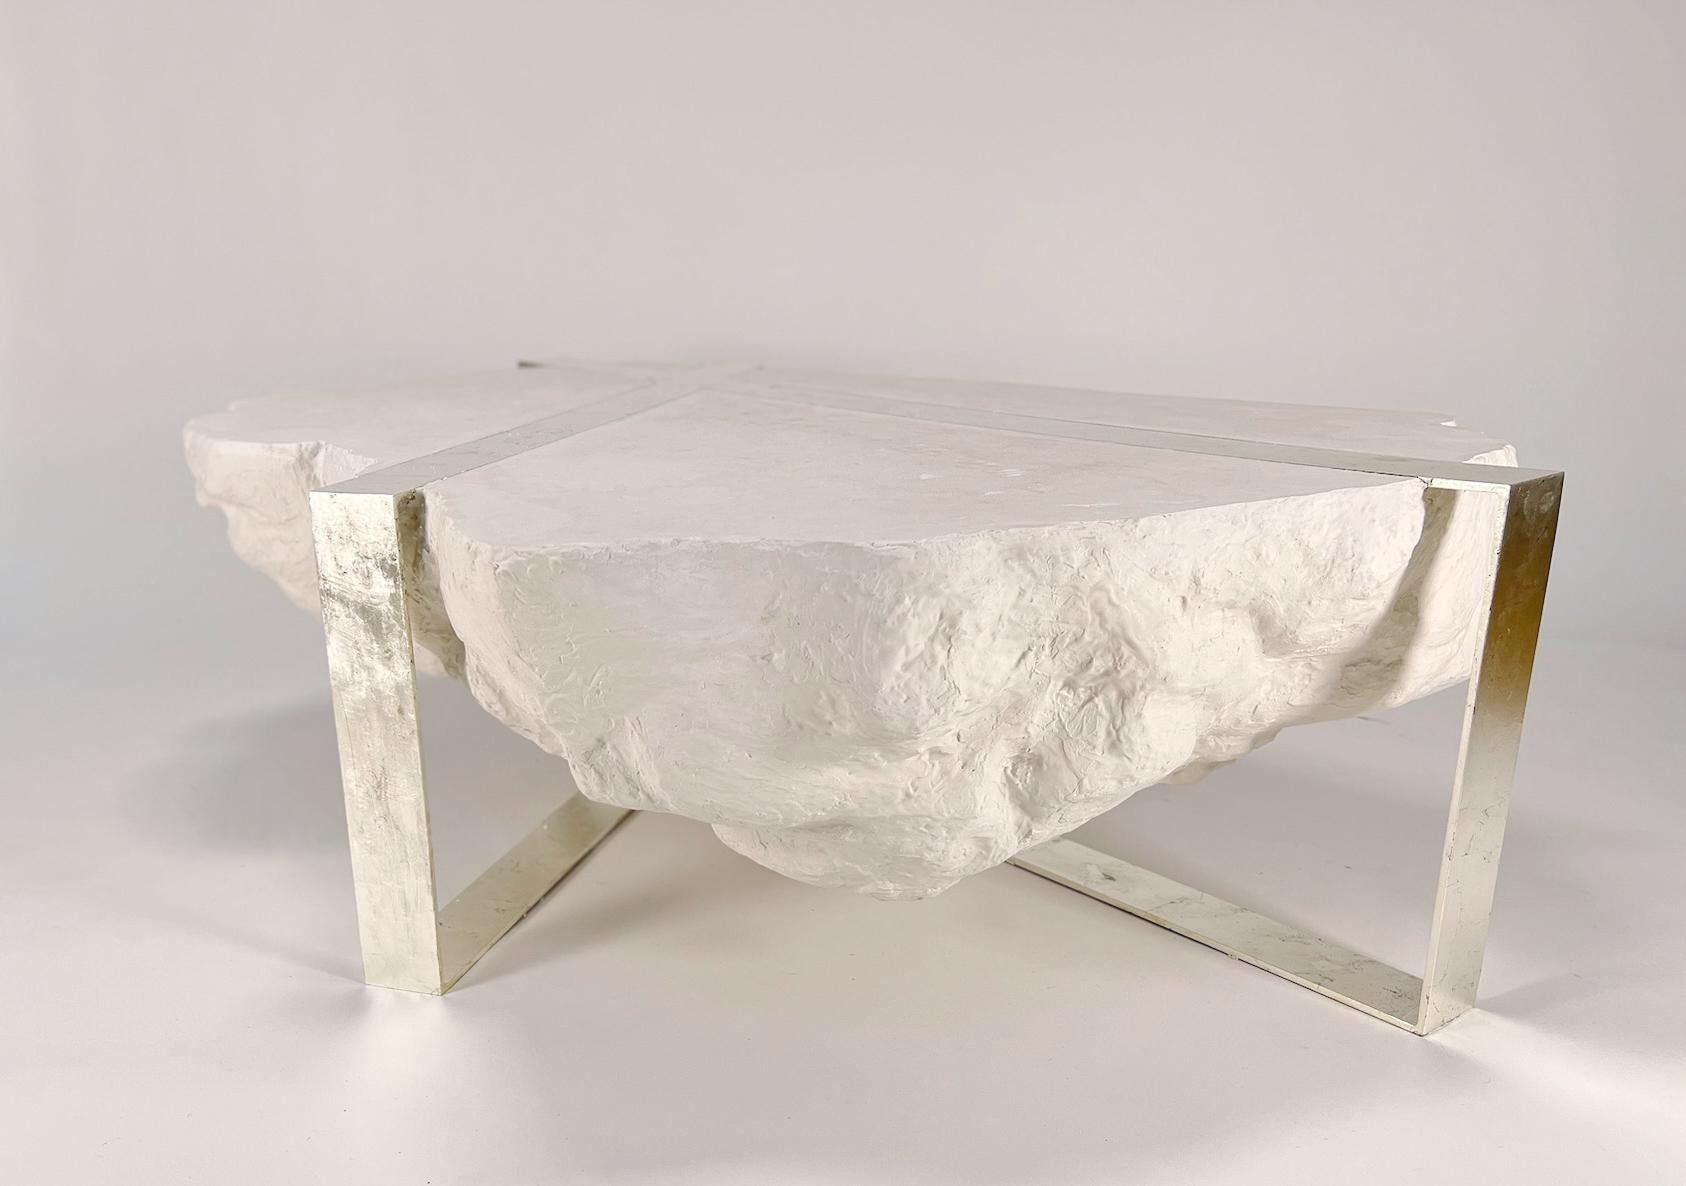 Ohlin Coffee Table - Contemporary One-Of-A-Kind Table by Artist Gabriel Anderson 2